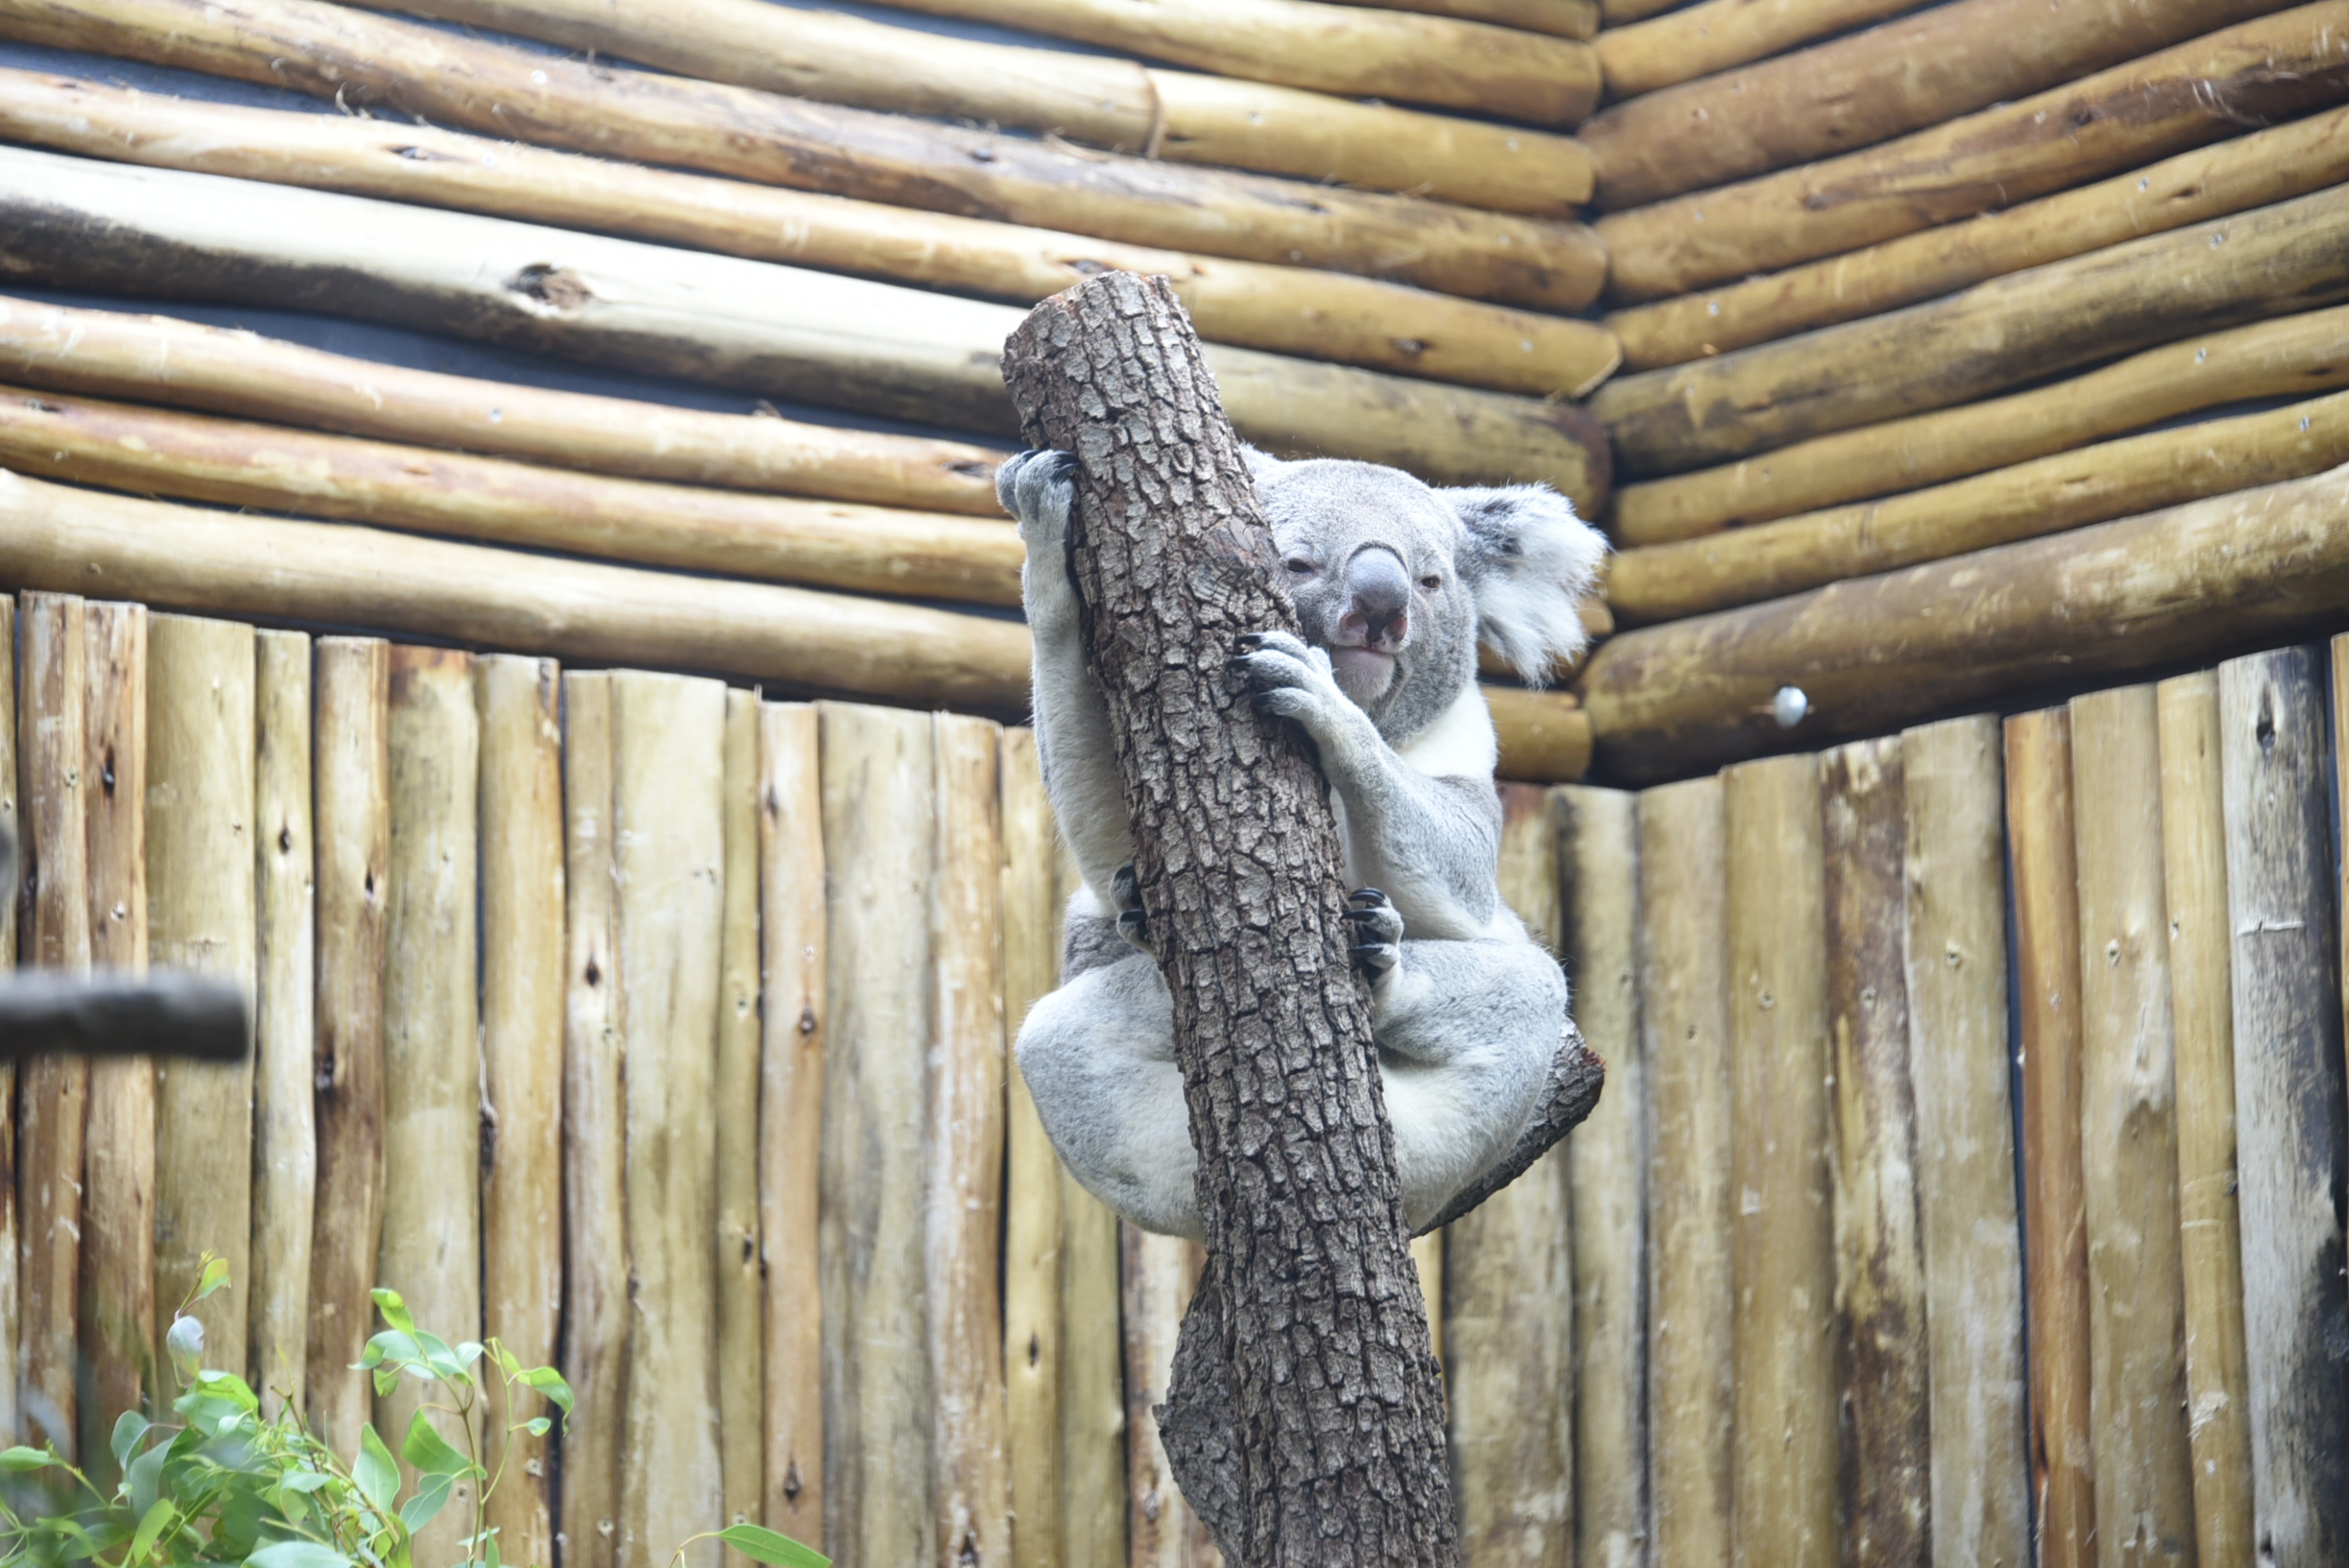  Koalas at the Dallas Zoo - 9 Best things to do at the Dallas Zoo | Outside Suburbia